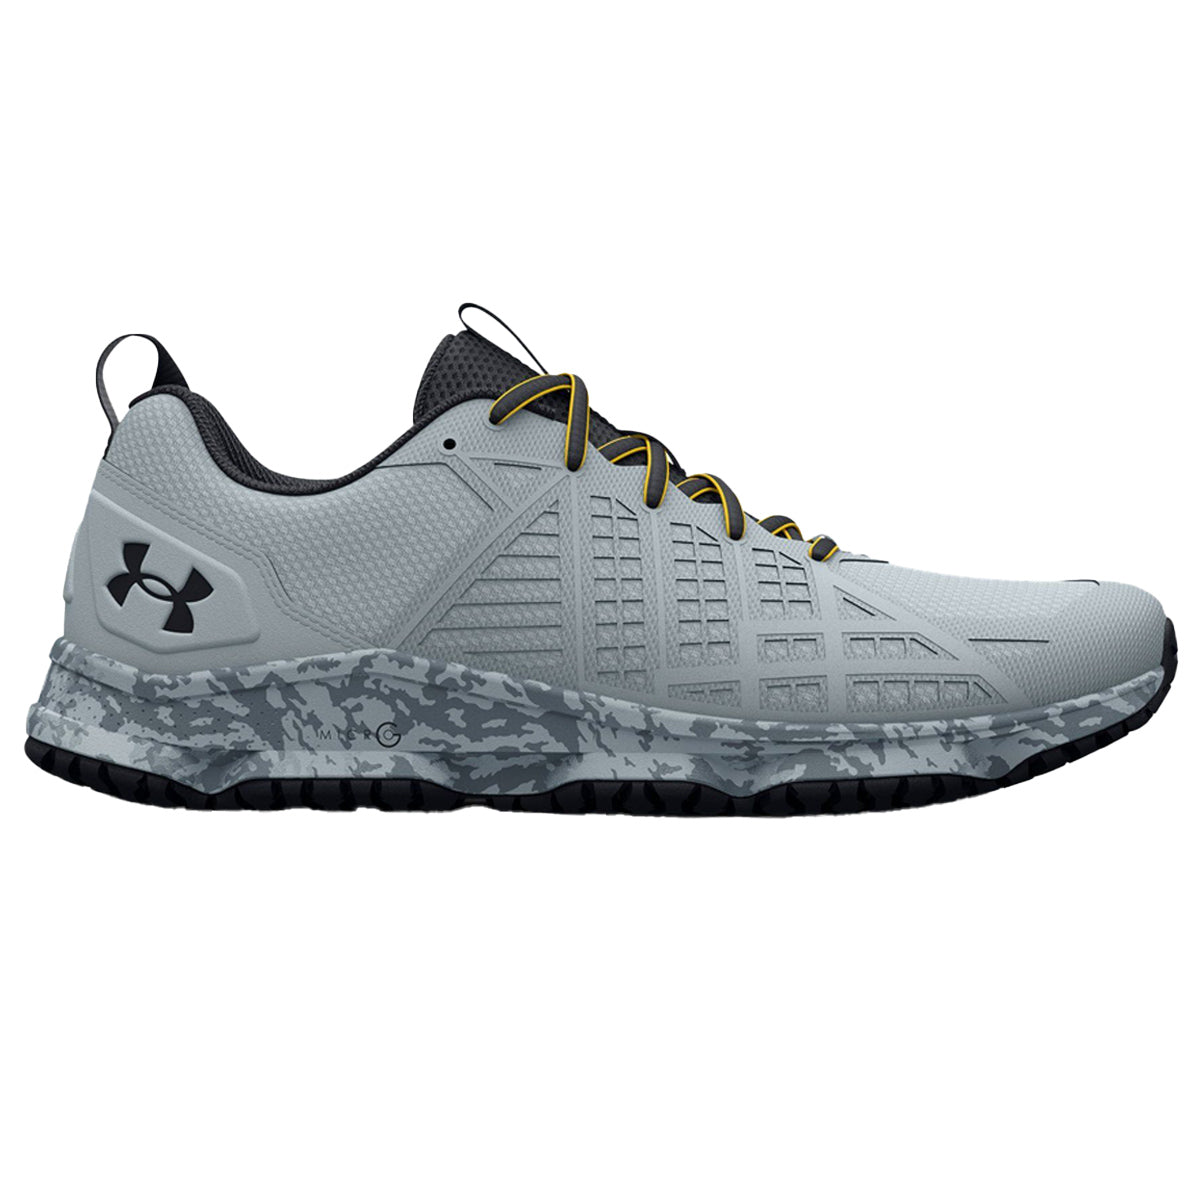 Under Armour Micro G Strikefast Tactical Shoes